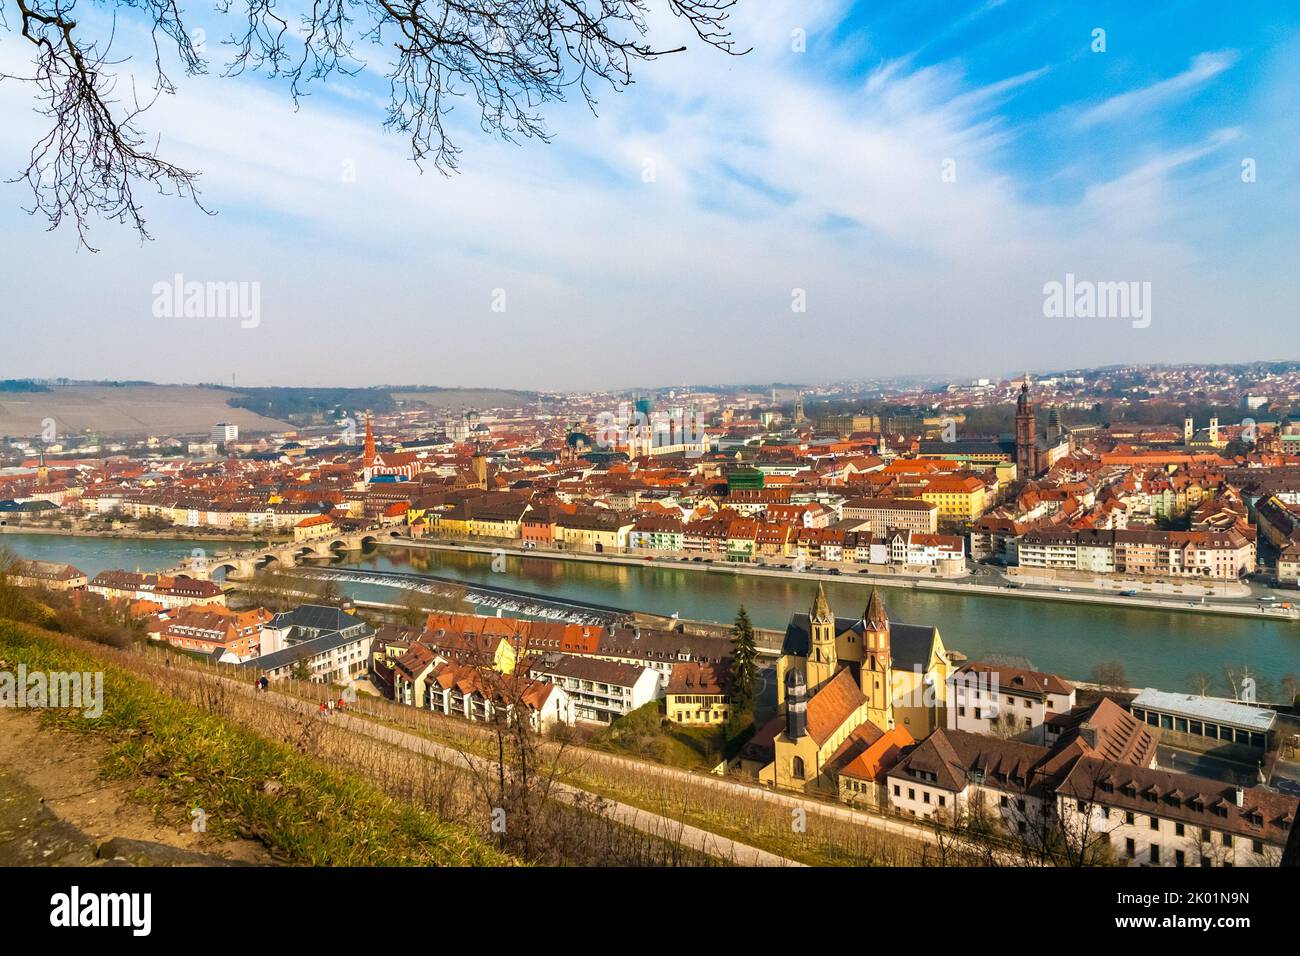 Panoramic view from the Marienberg Fortress of Würzburg's famous landmarks, like the bridge Alte Mainbrücke, the Marienkapelle, the Neumünster... Stock Photo